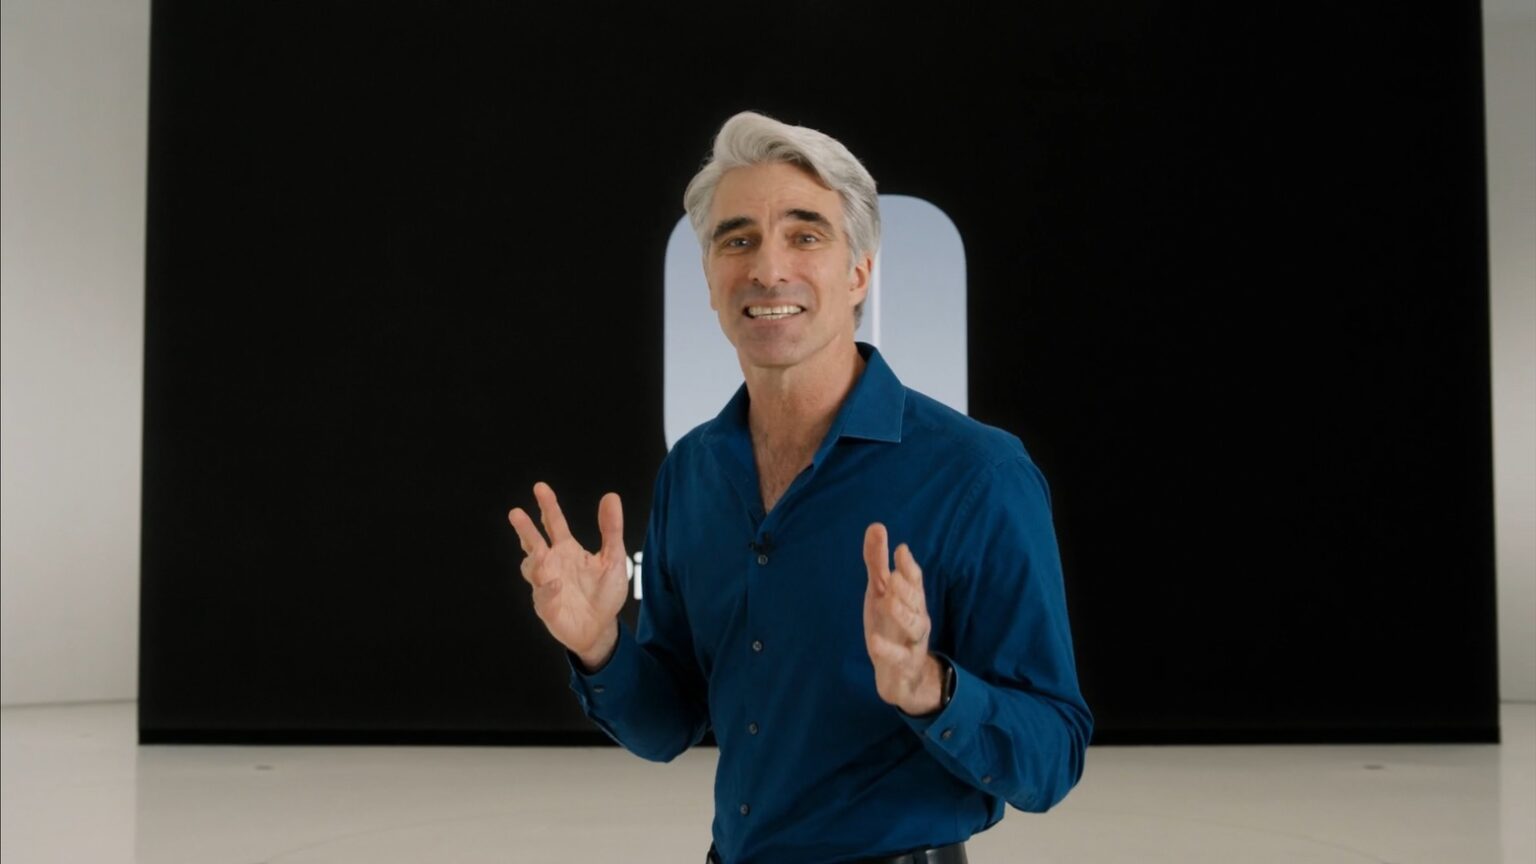 Craig Federighi explained today why there’s no iPad Calculator app.